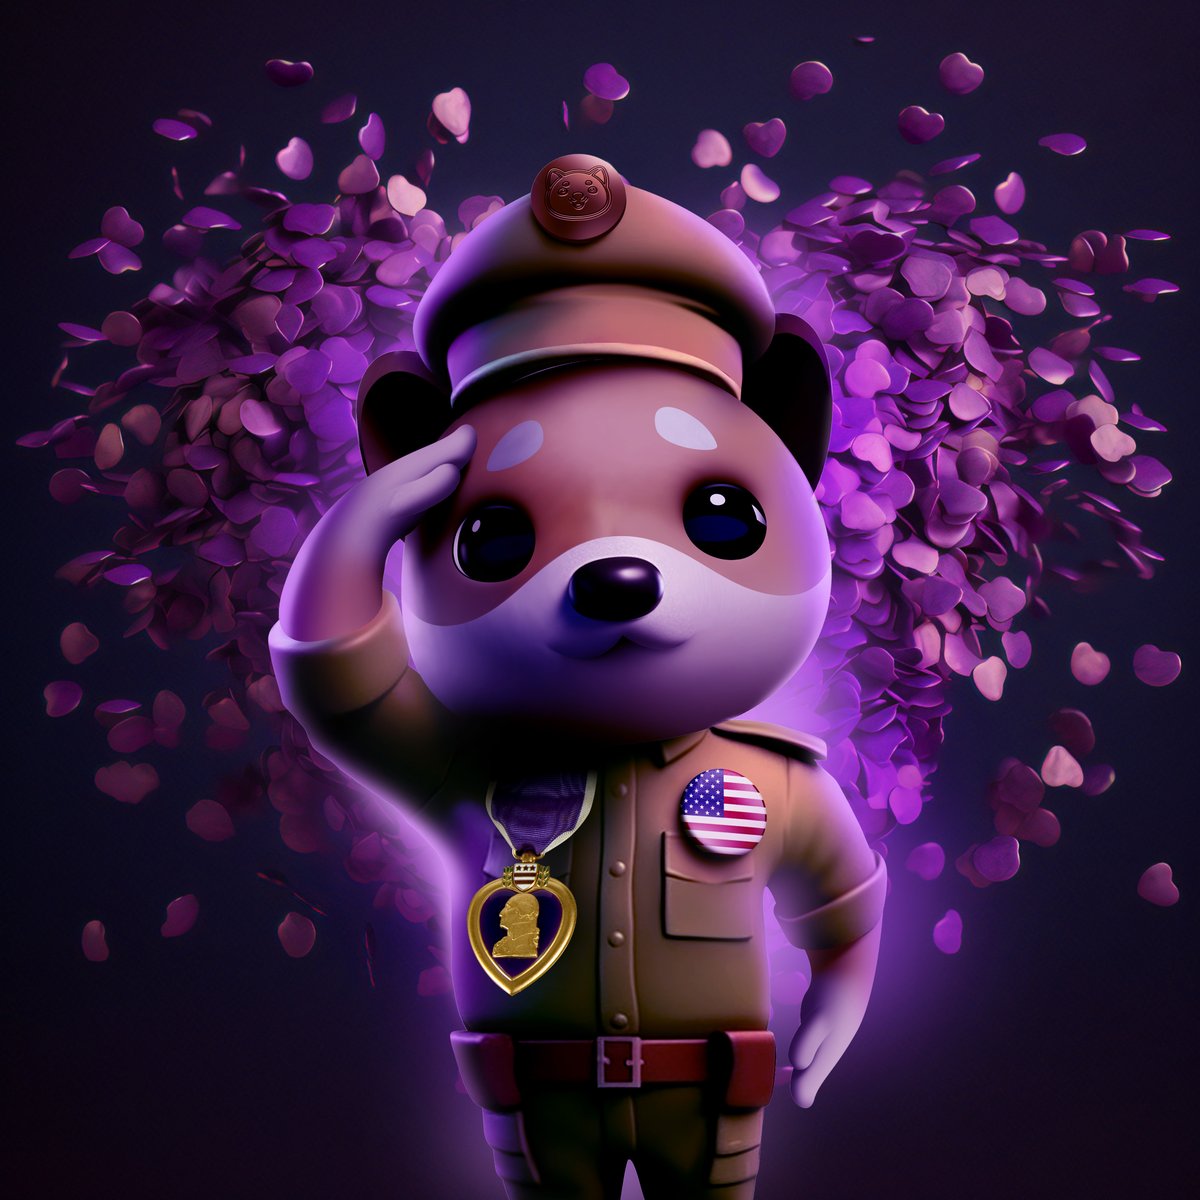 Celebrate Purple Heart Day with Baby Doge! 🐶💜 Spread love and kindness today, just like Baby Doge spreads cuteness and joy! Let's honor our brave heroes and show appreciation for their sacrifices. #PurpleHeartDay #BabyDogeLove